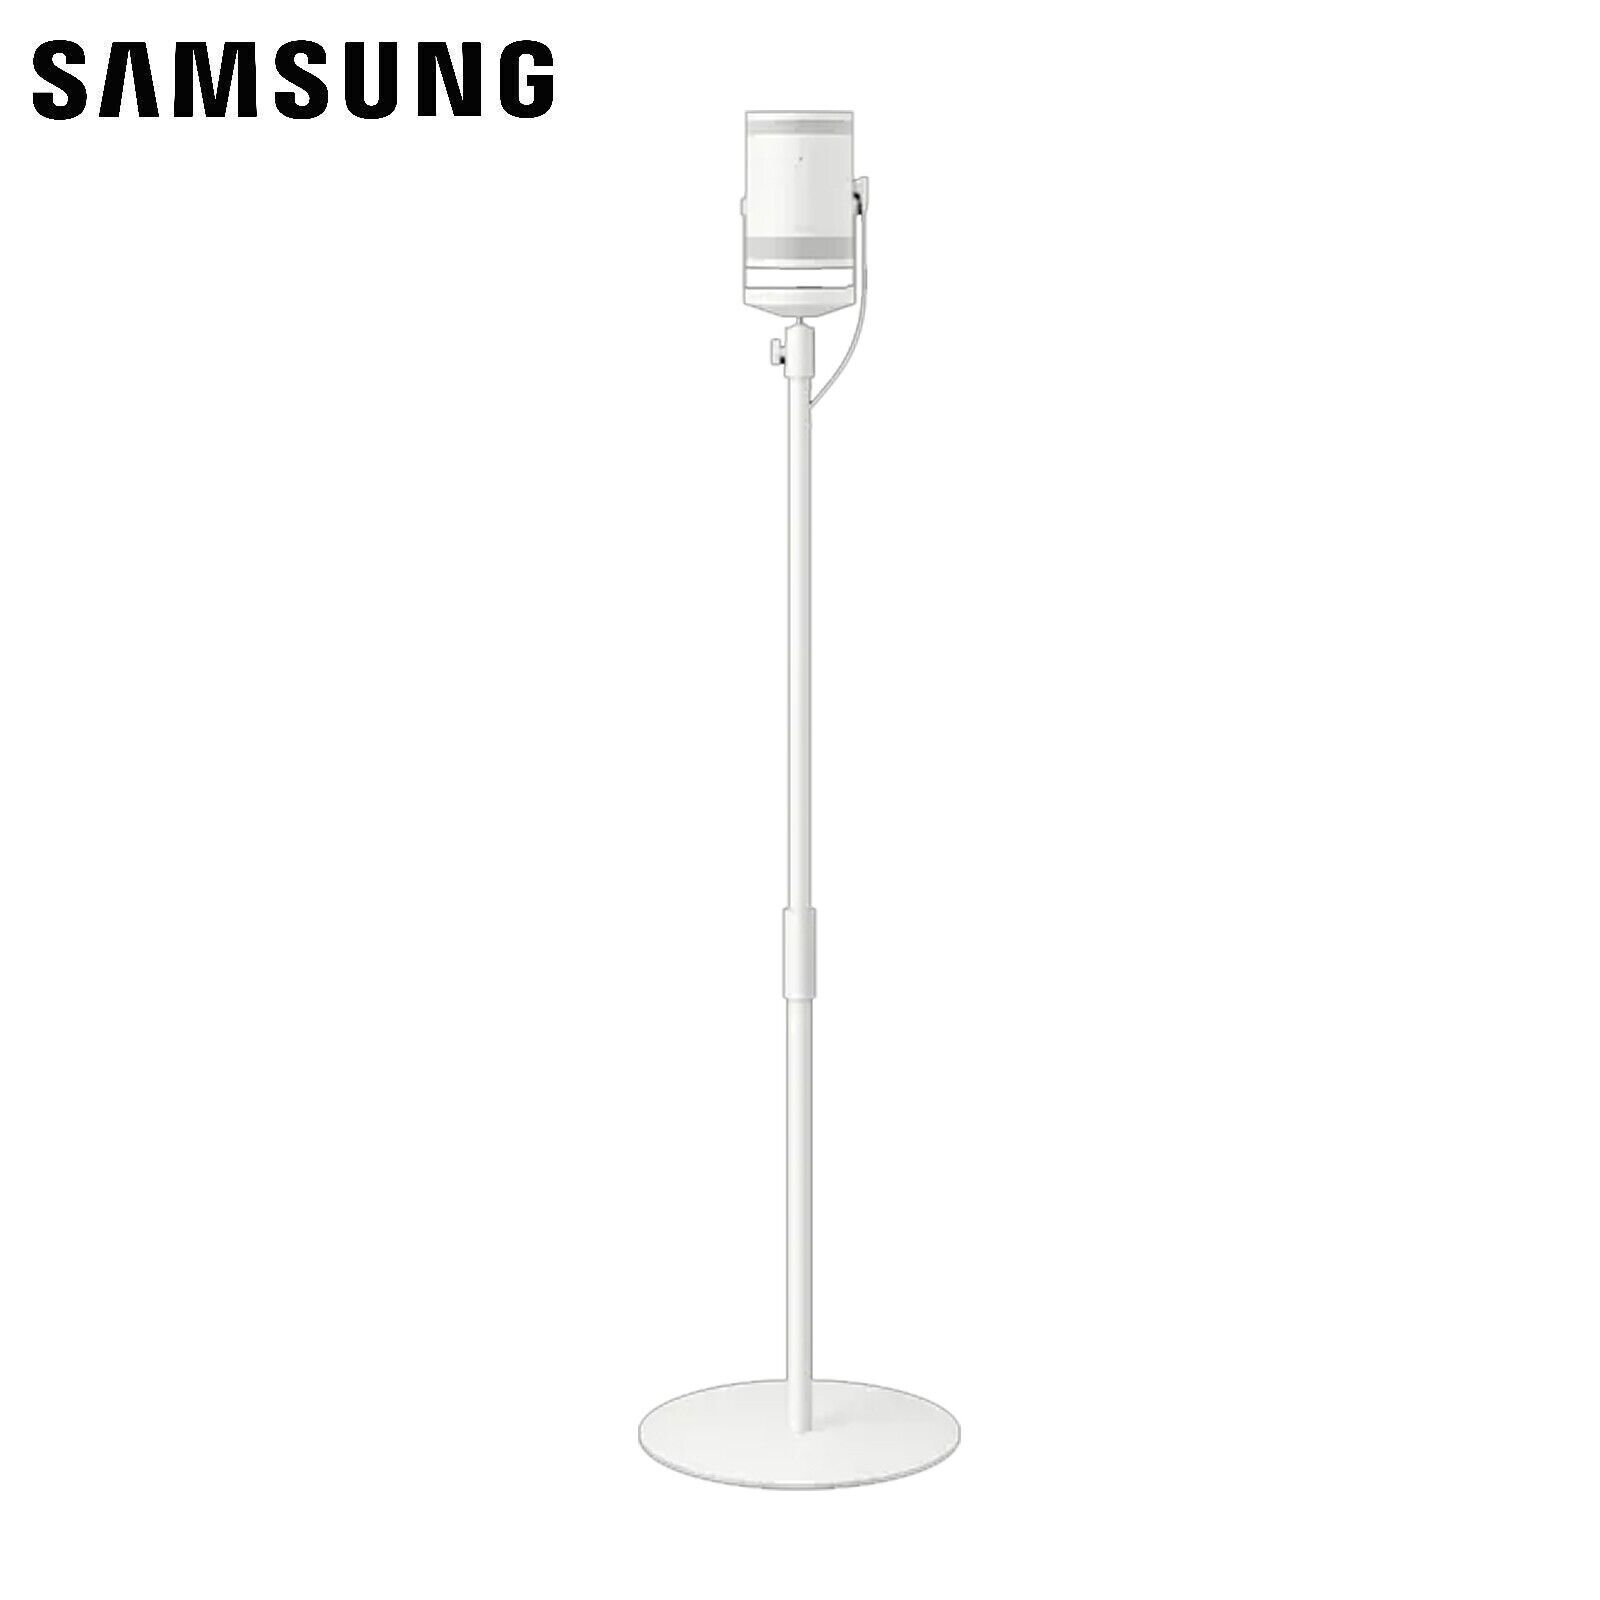 SAMSUNG VG-FSD3BW/KR The Freestyle Stand White